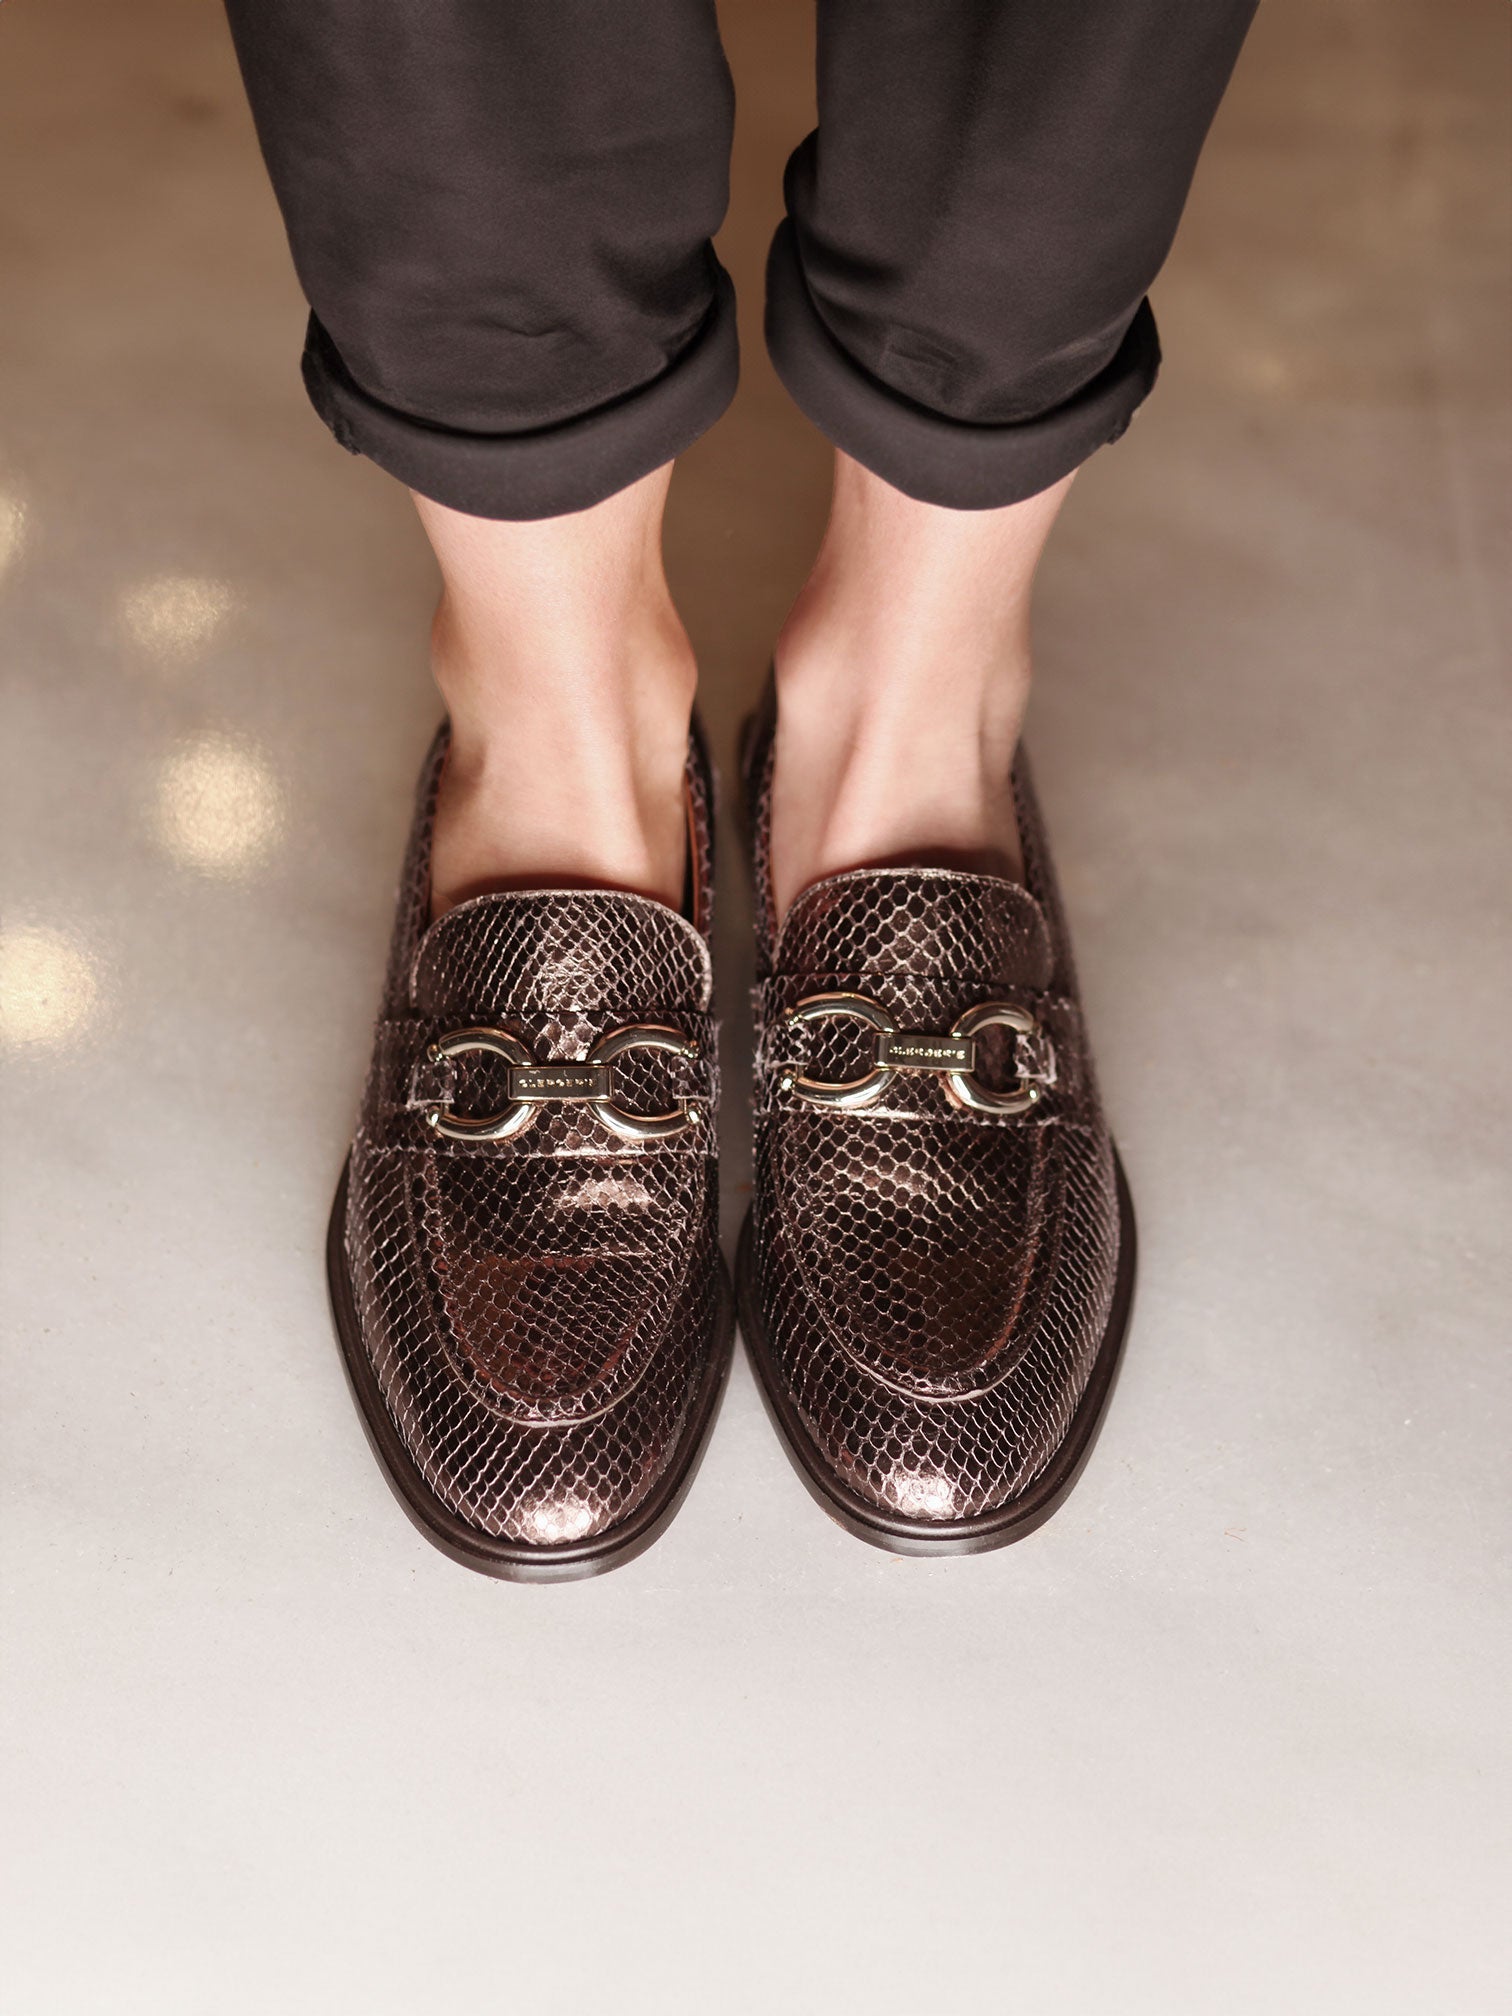 LOAFERS - JAEL moccasins, snake effect brown - 3606064001112 - Clergerie Paris - Europe